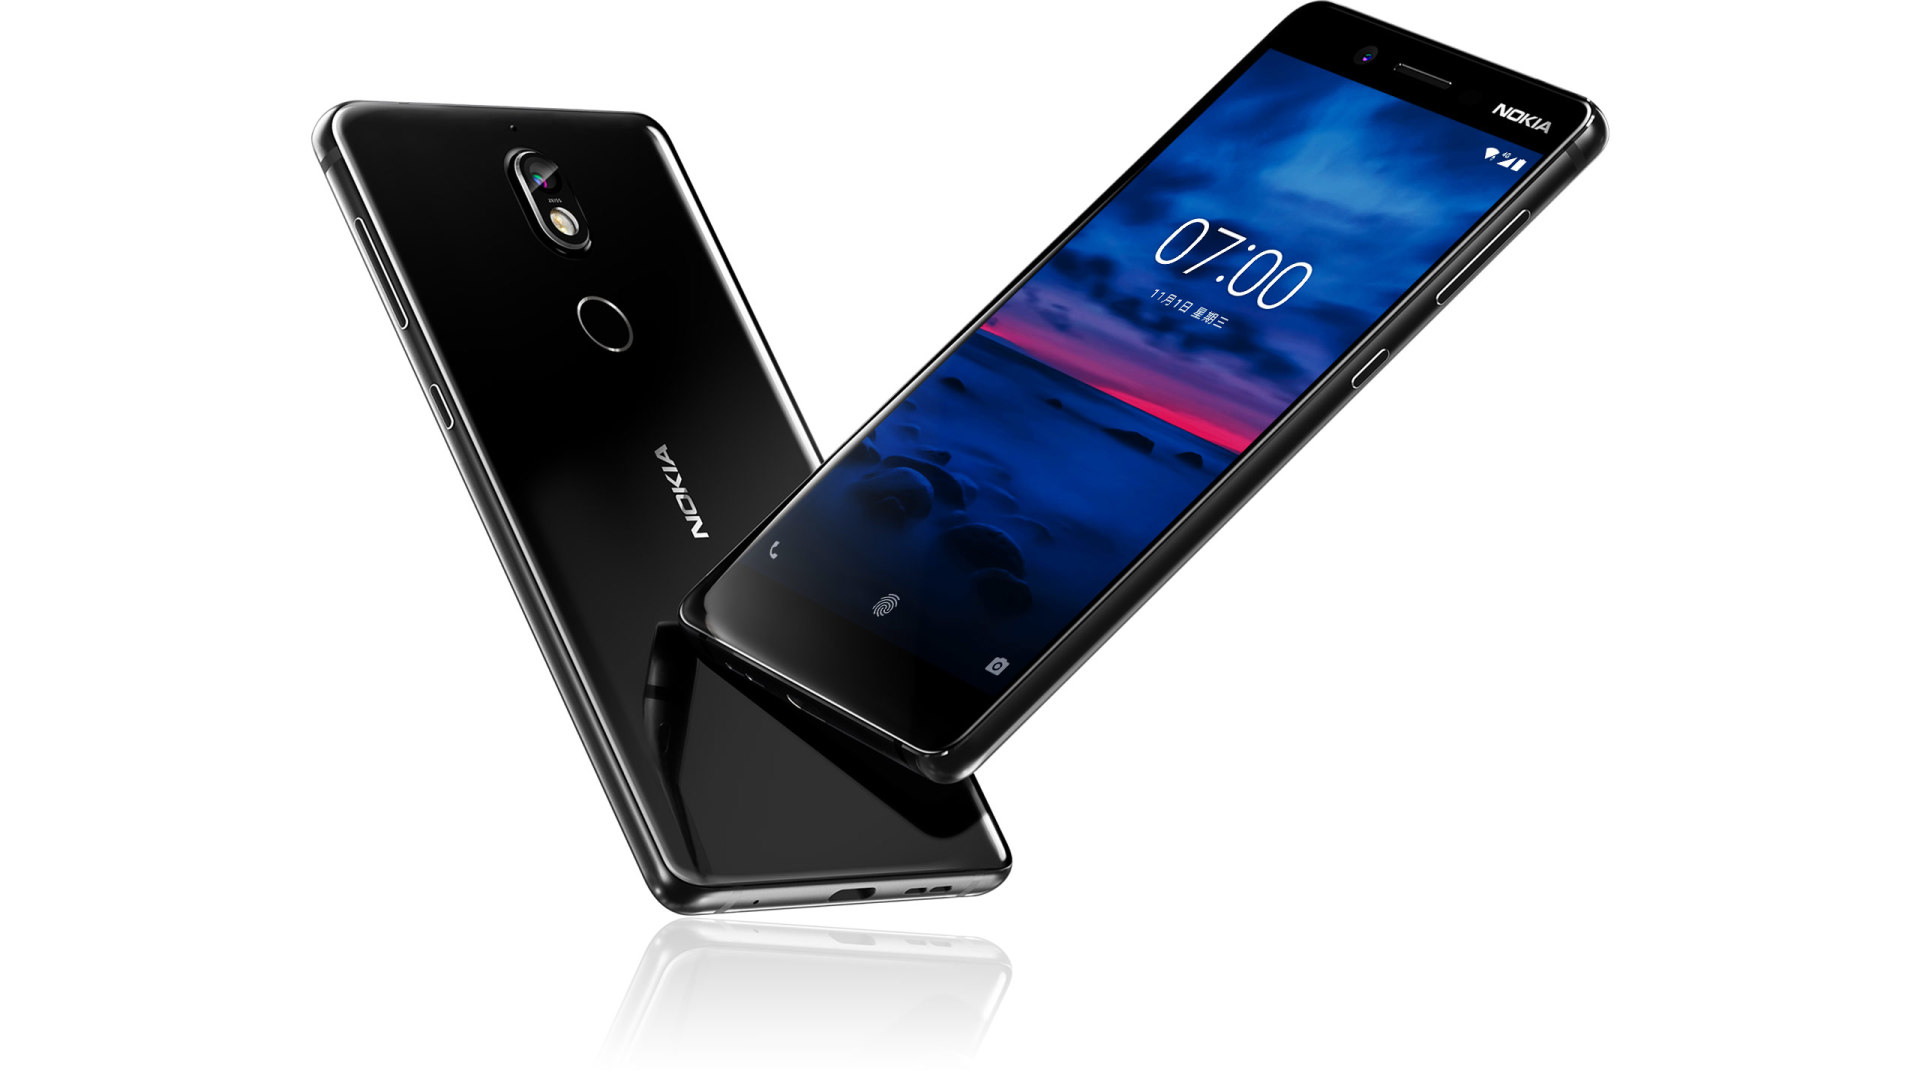 Nokia 7 launched with Snapdragon 630, Carl Zeiss camera 1